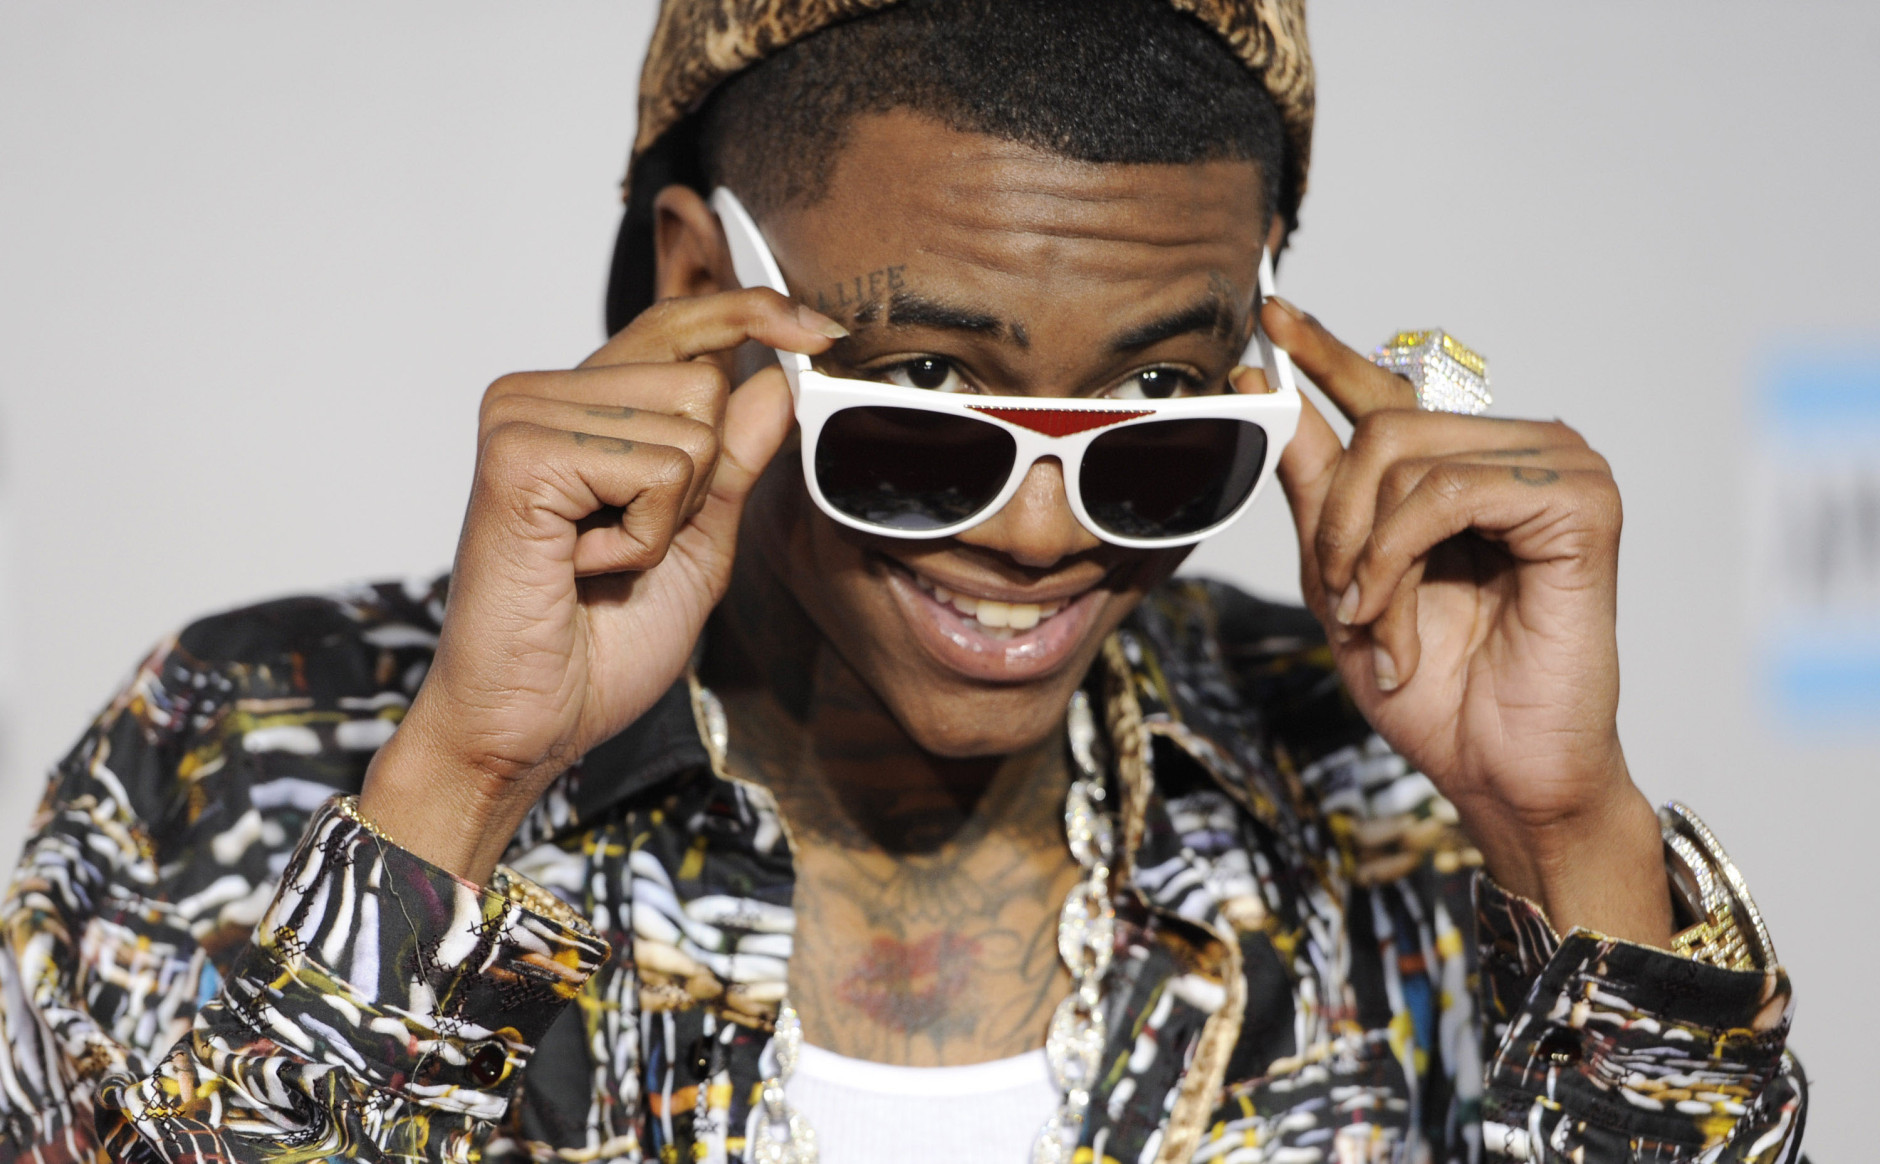 Rapper Soulja Boy is 25 on July 28, 2015. Here, Soulja Boy arrives at the 39th Annual American Music Awards on Sunday, Nov. 20, 2011 in Los Angeles. (AP Photo/Chris Pizzello)